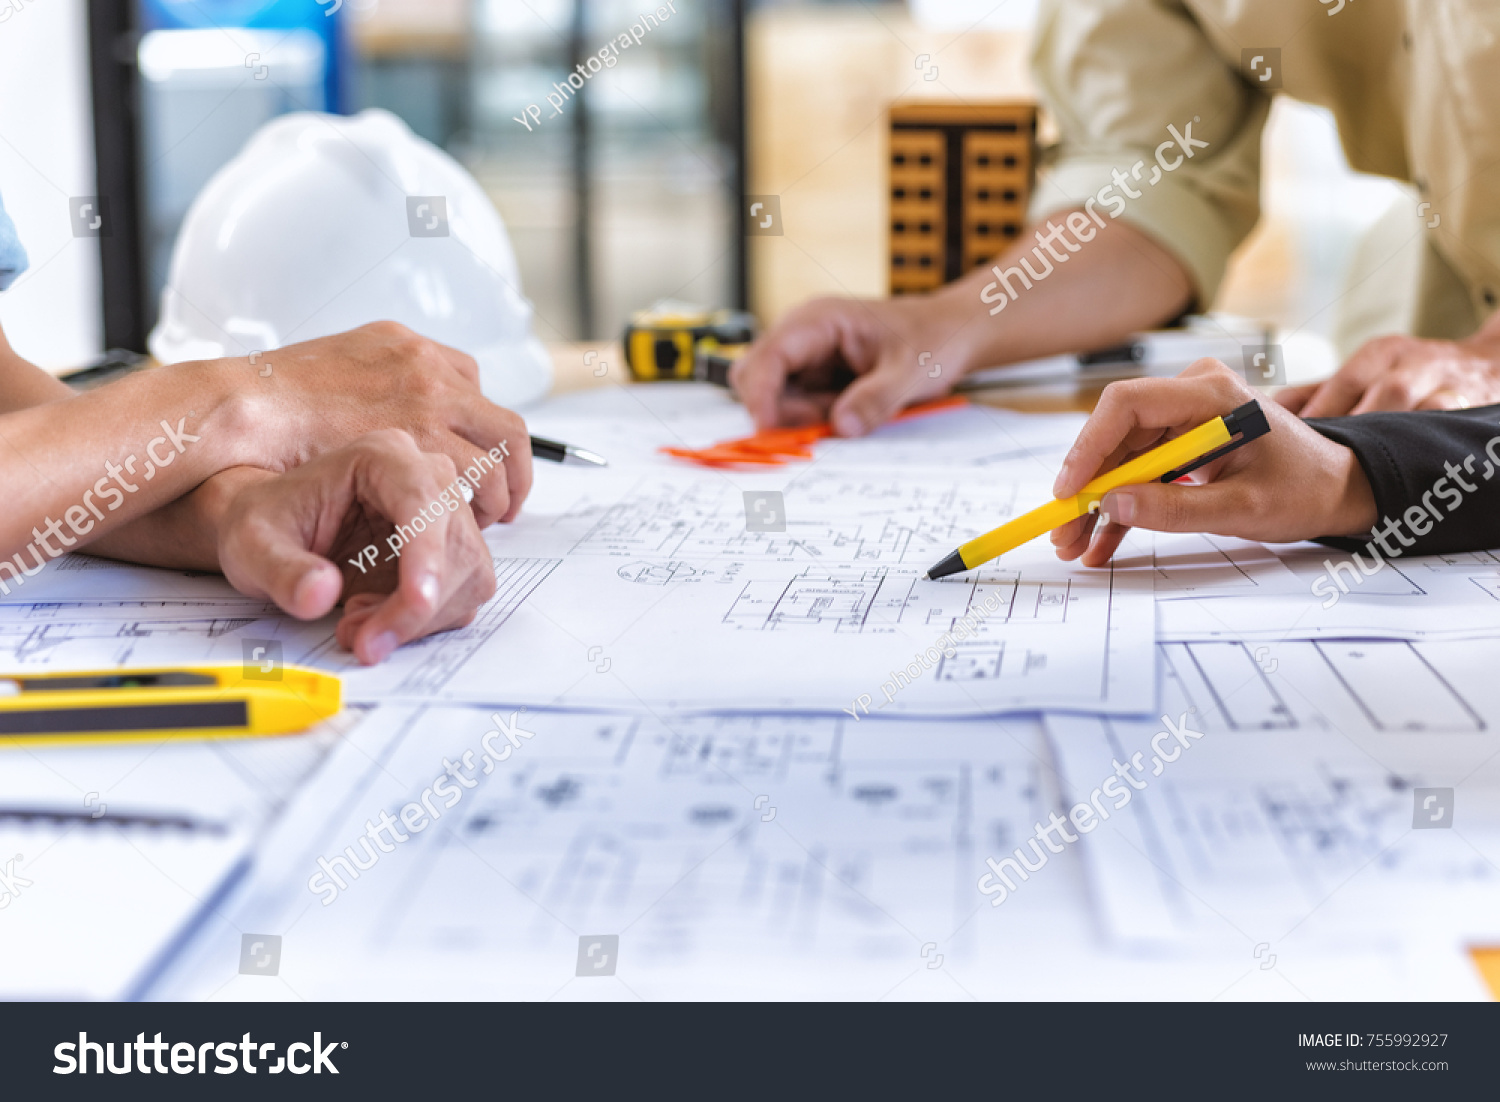 Image of team engineer checks construction blueprints on new project with engineering tools at desk in office. #755992927